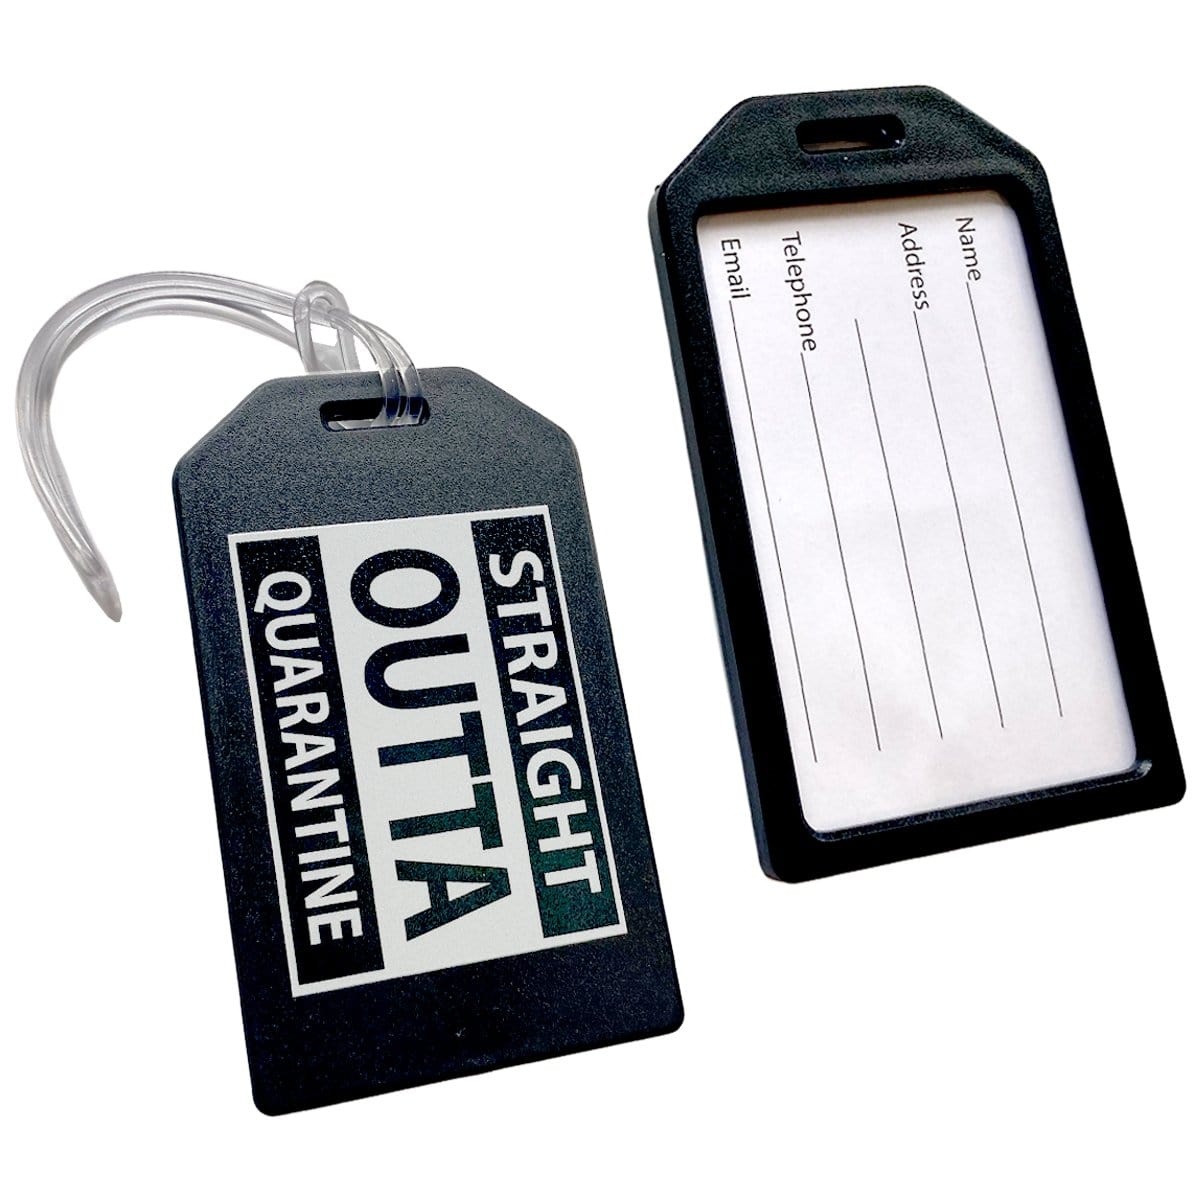 2 Pack - STRAIGHT OUTTA QUARANTINE Luggage Tags with Plastic Loop Ties -  Bag Tag Identifier